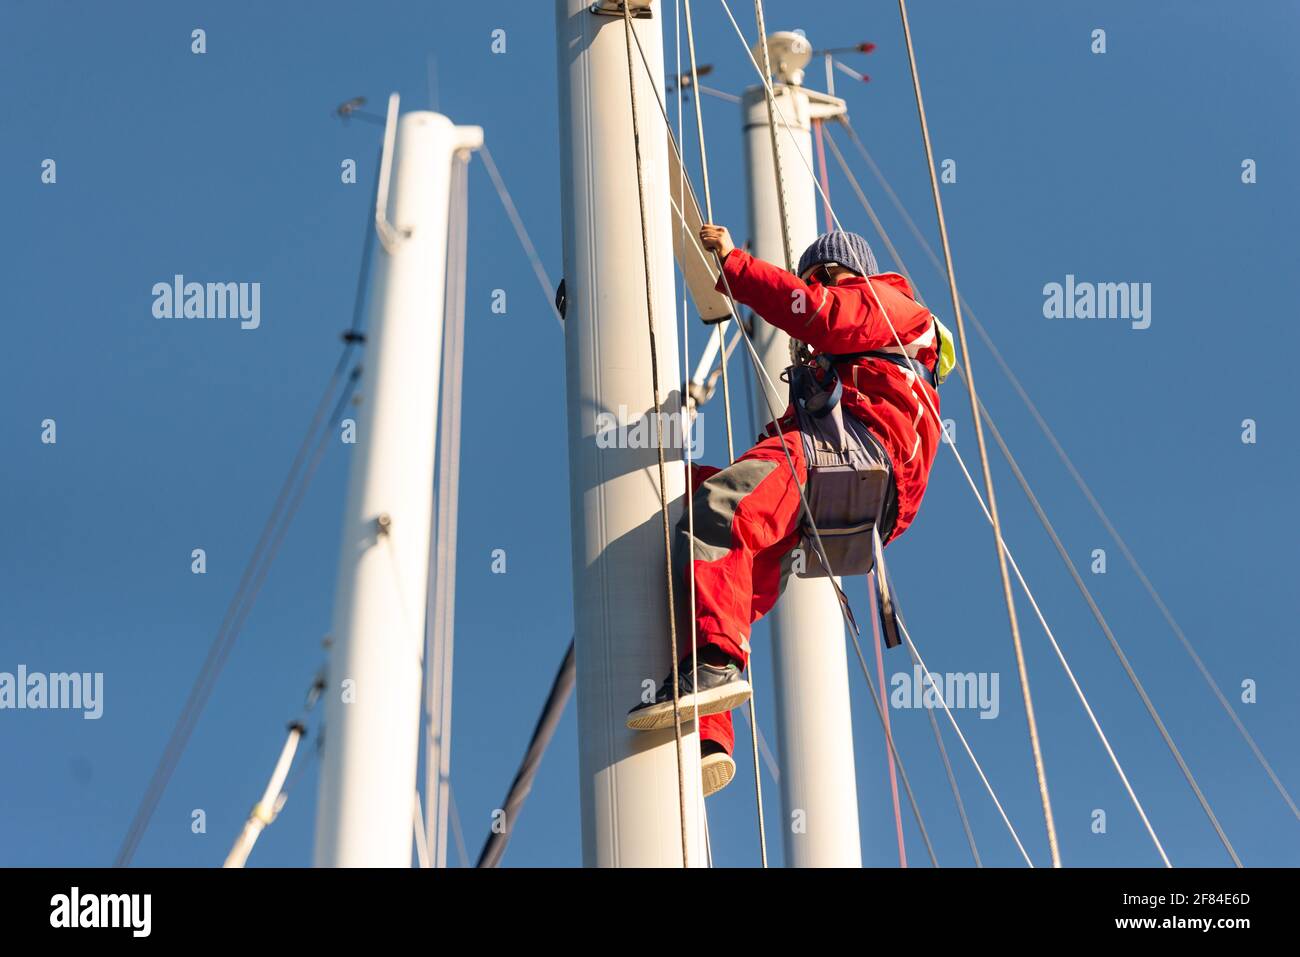 Sevastopol. Crimea. Autumn 2020. The yachtsman climbed the mast. Repair of the device for measuring wind speed and direction. Stock Photo